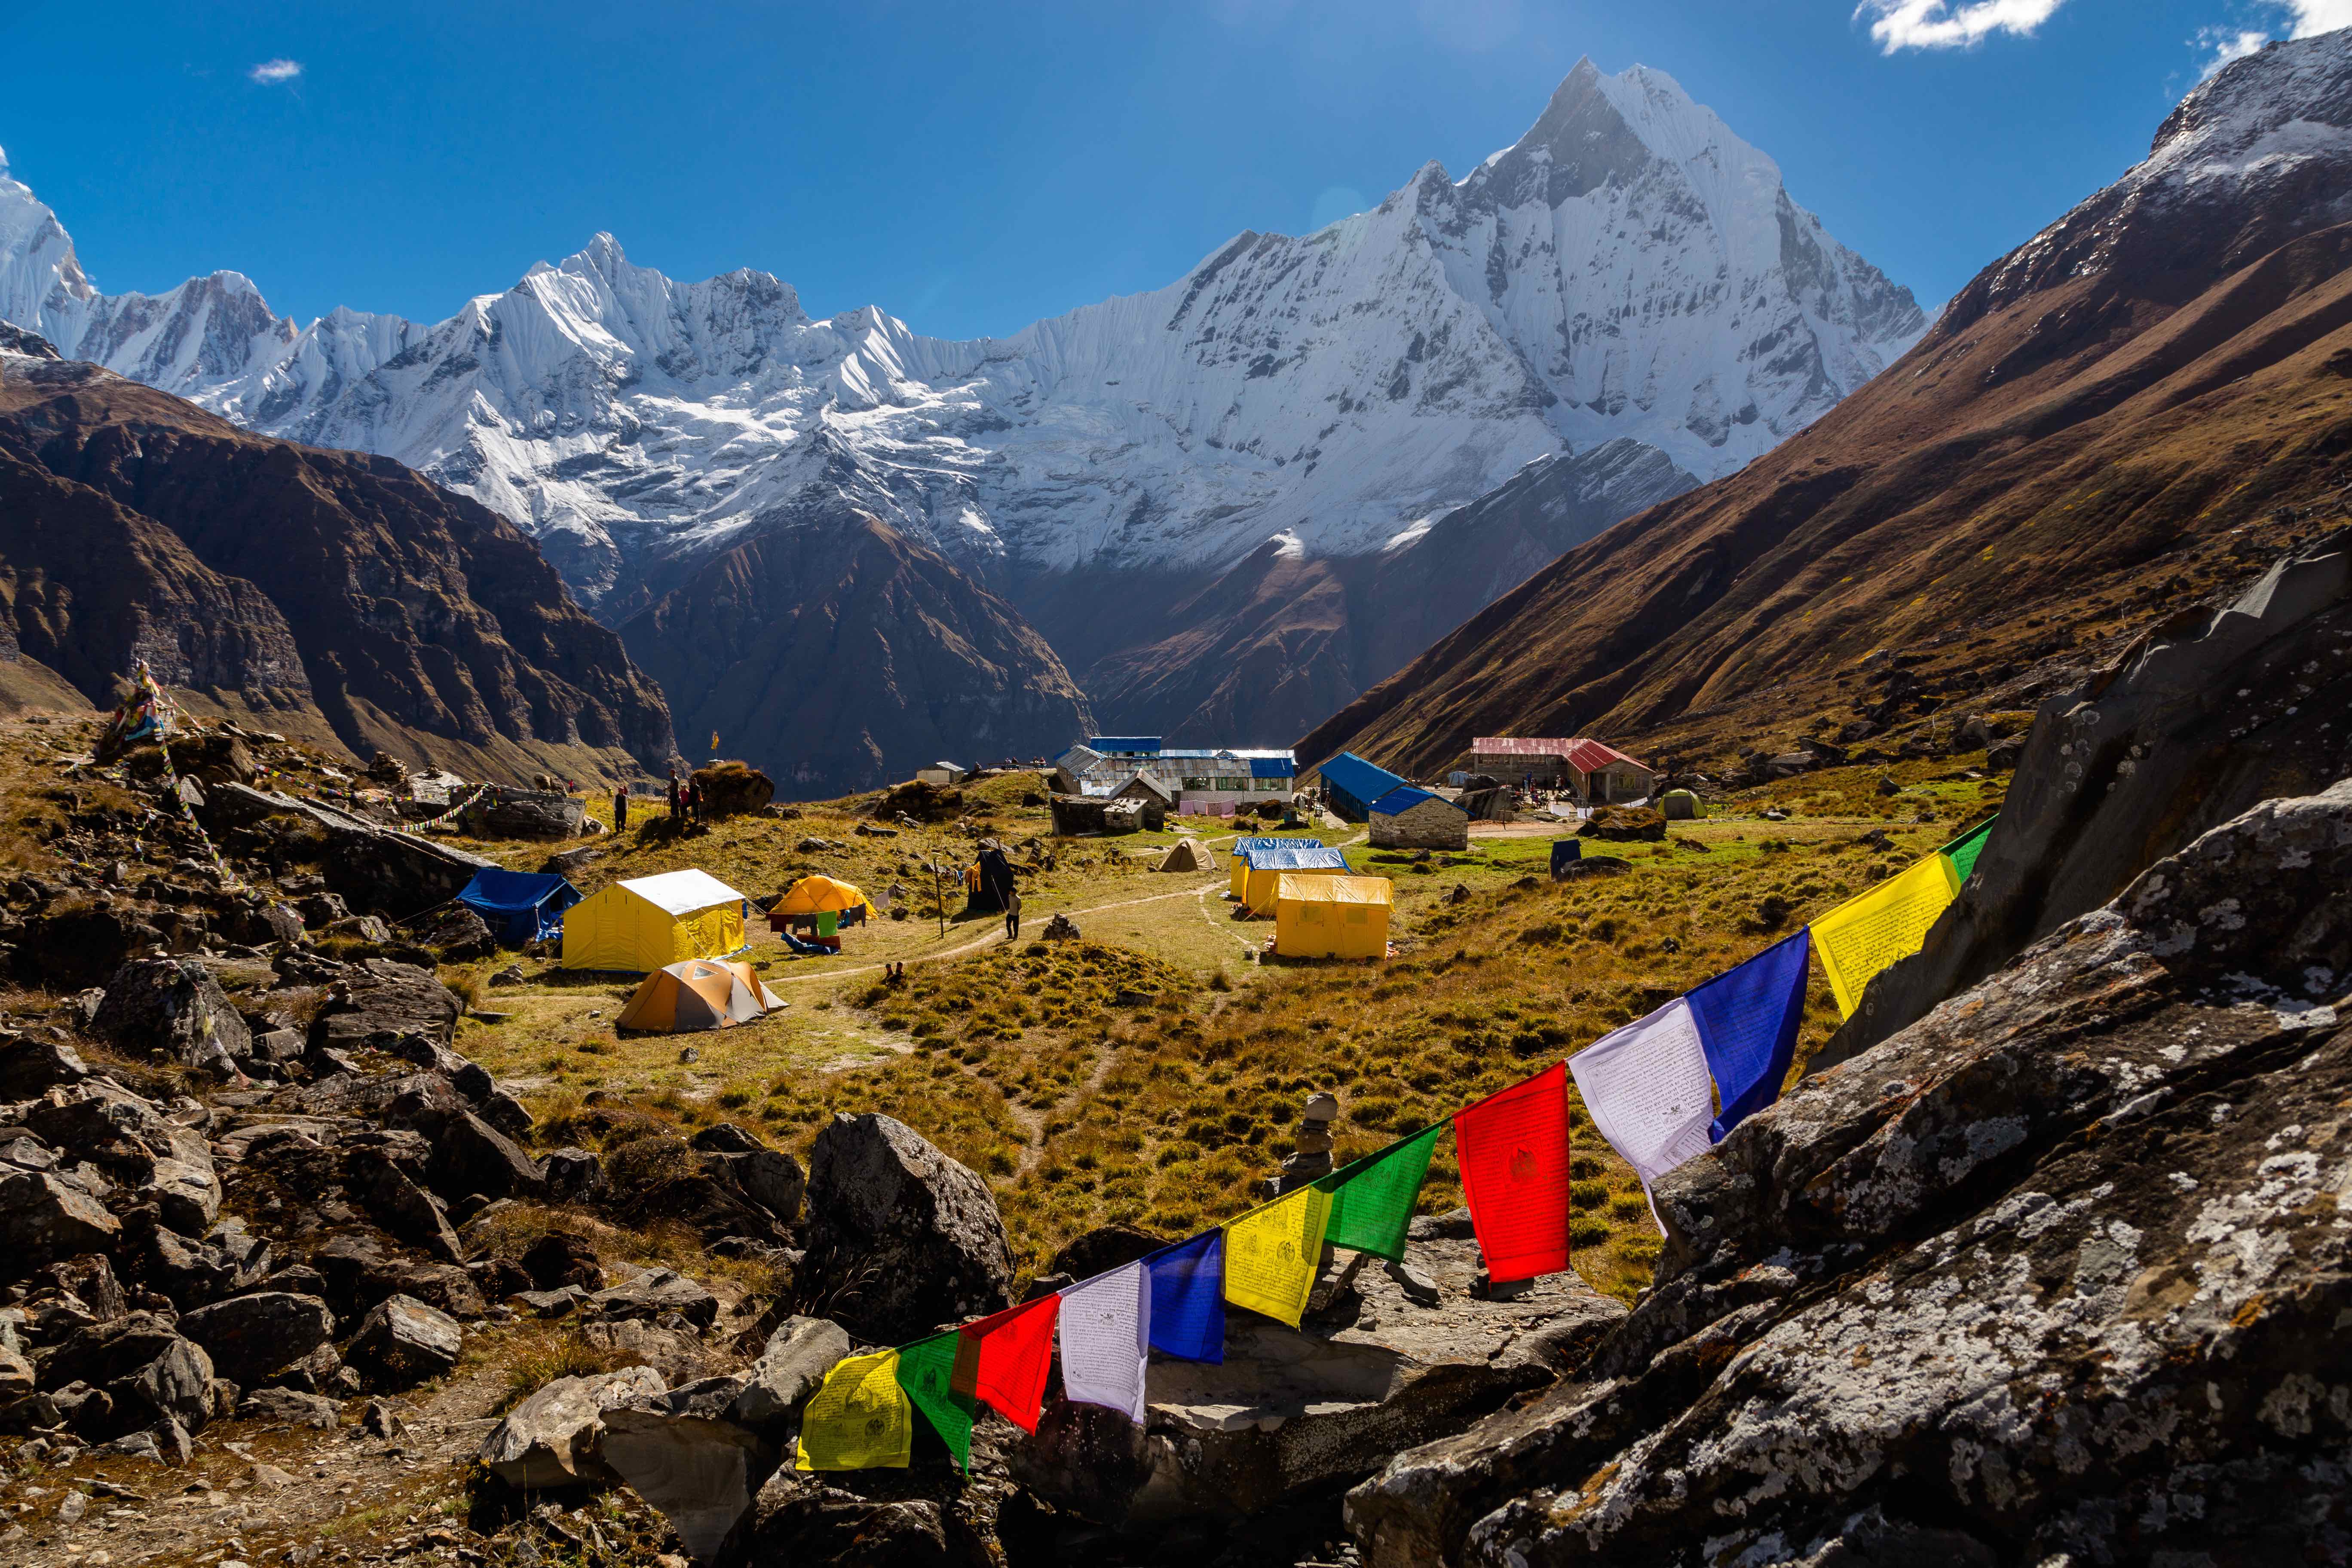 A Guide to Trekking in Annapurna: From the Circuit to the Sanctuary